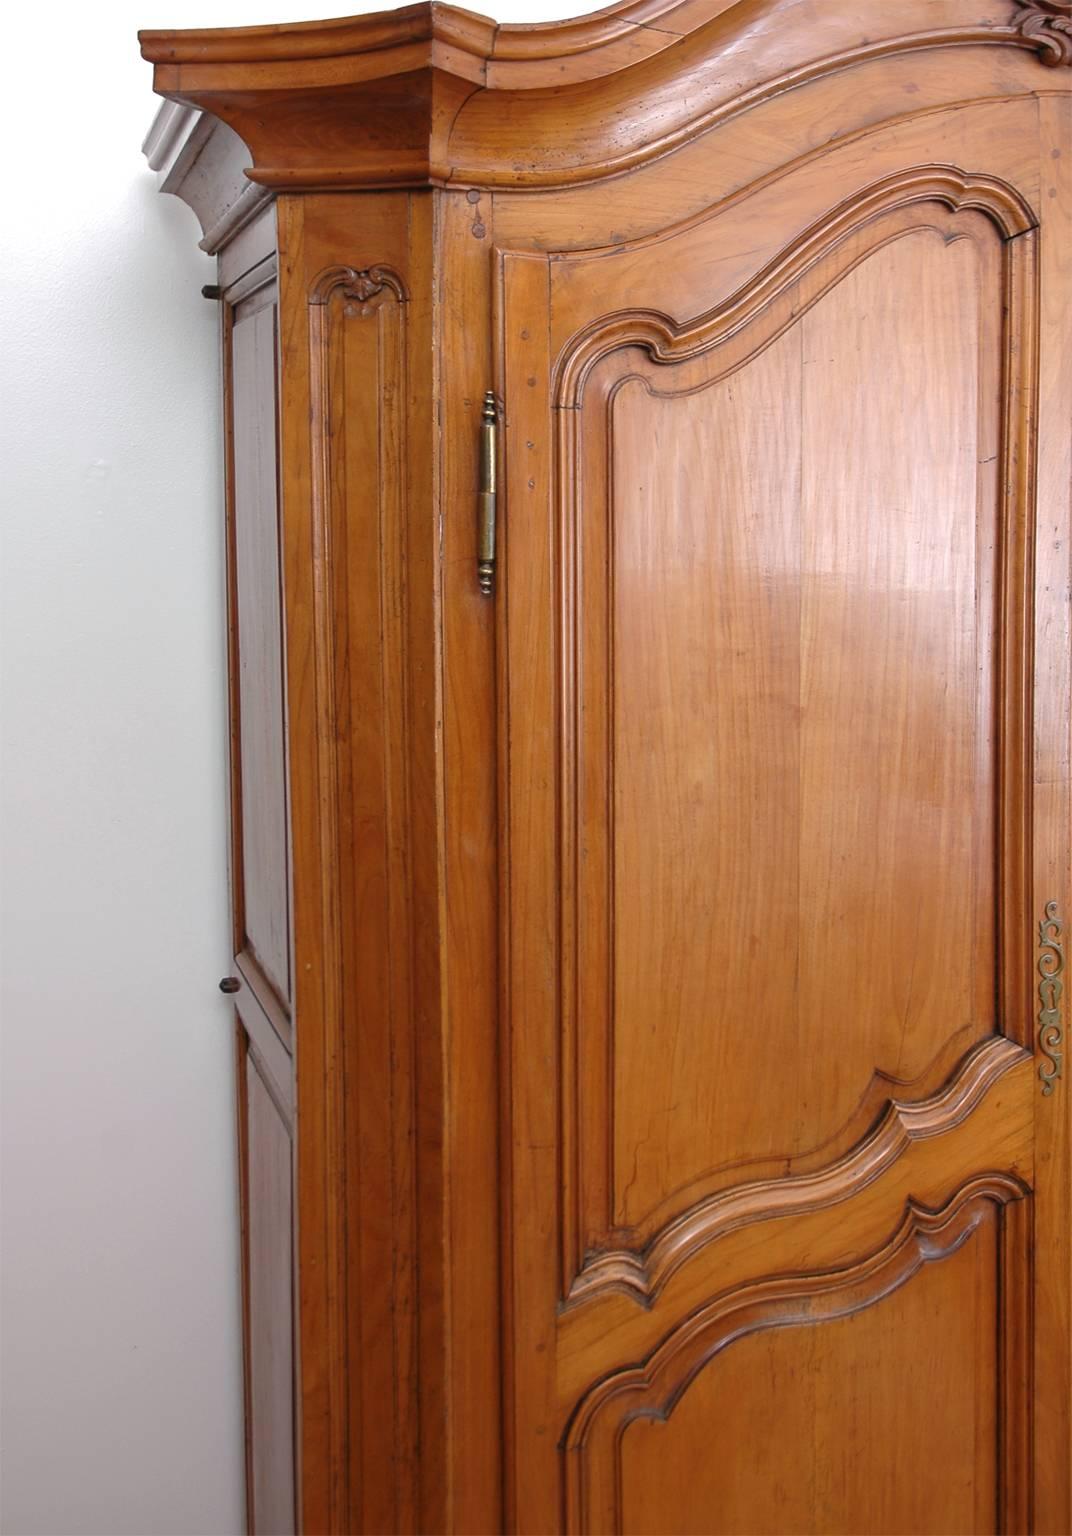 A handsome Louis XV armoire in wild Cherrywood with arched crest molding and carved bonnet, two doors that are also arched and paneled, carved apron and escargot feet, France, circa 1750 with later additions.
Measurements: 73